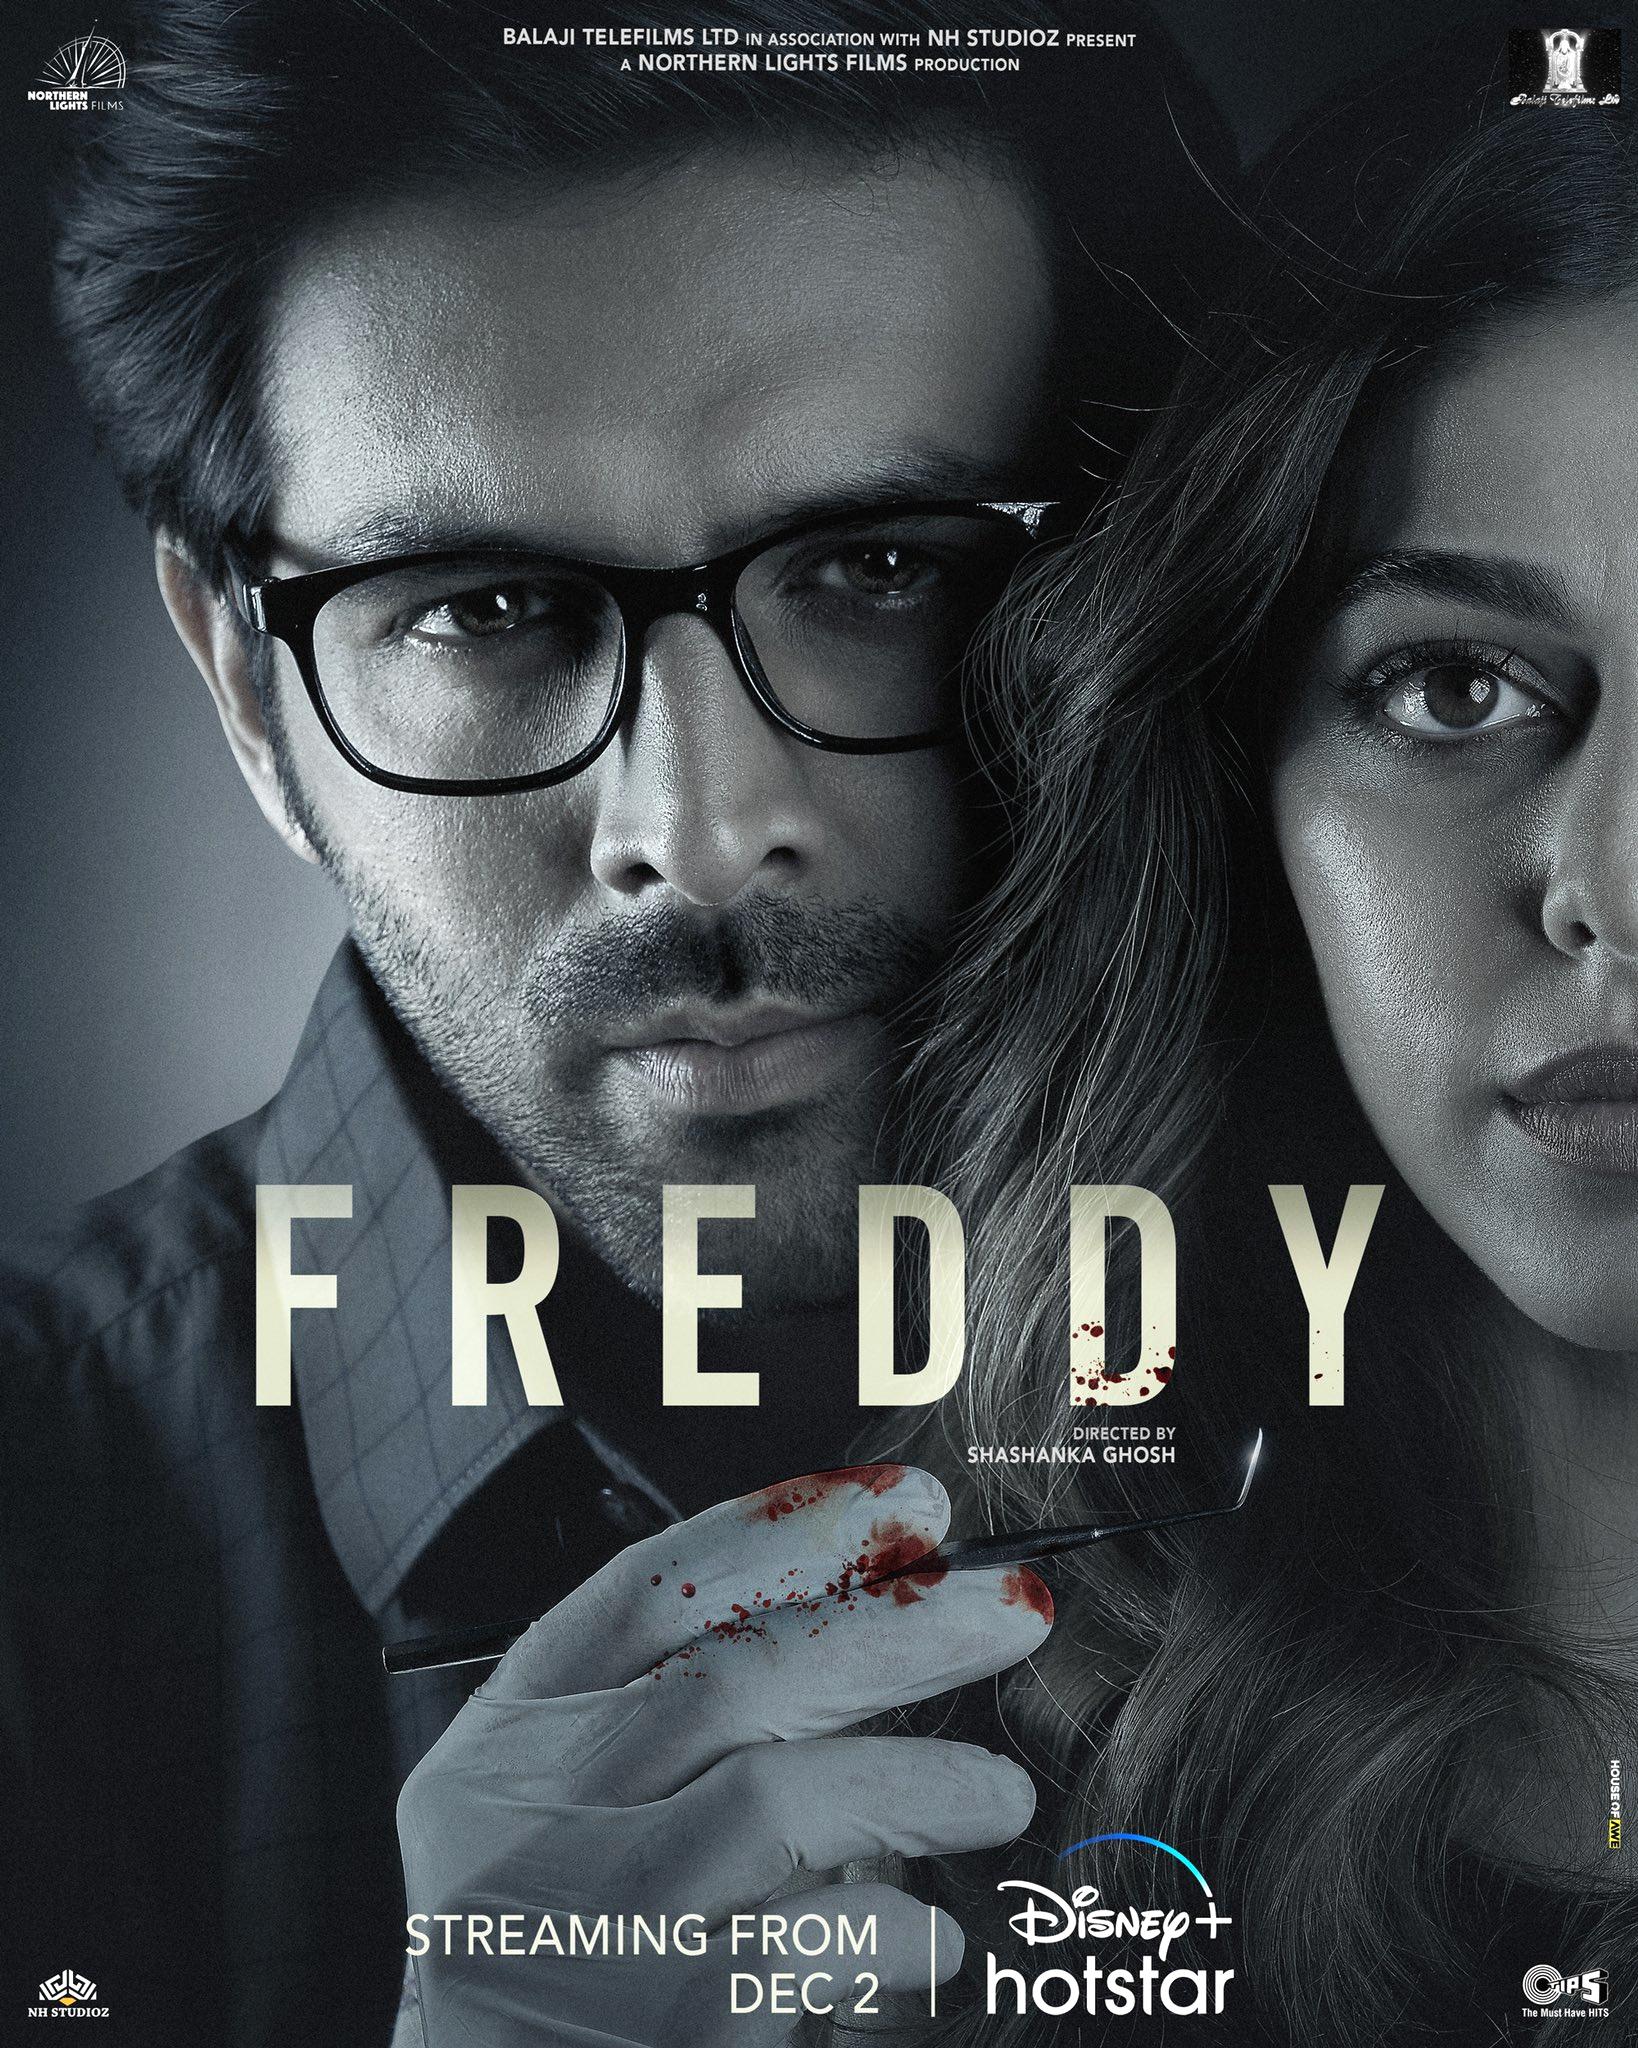 Freddy Movie 2022, Official Trailer, Release Date, HD Poster